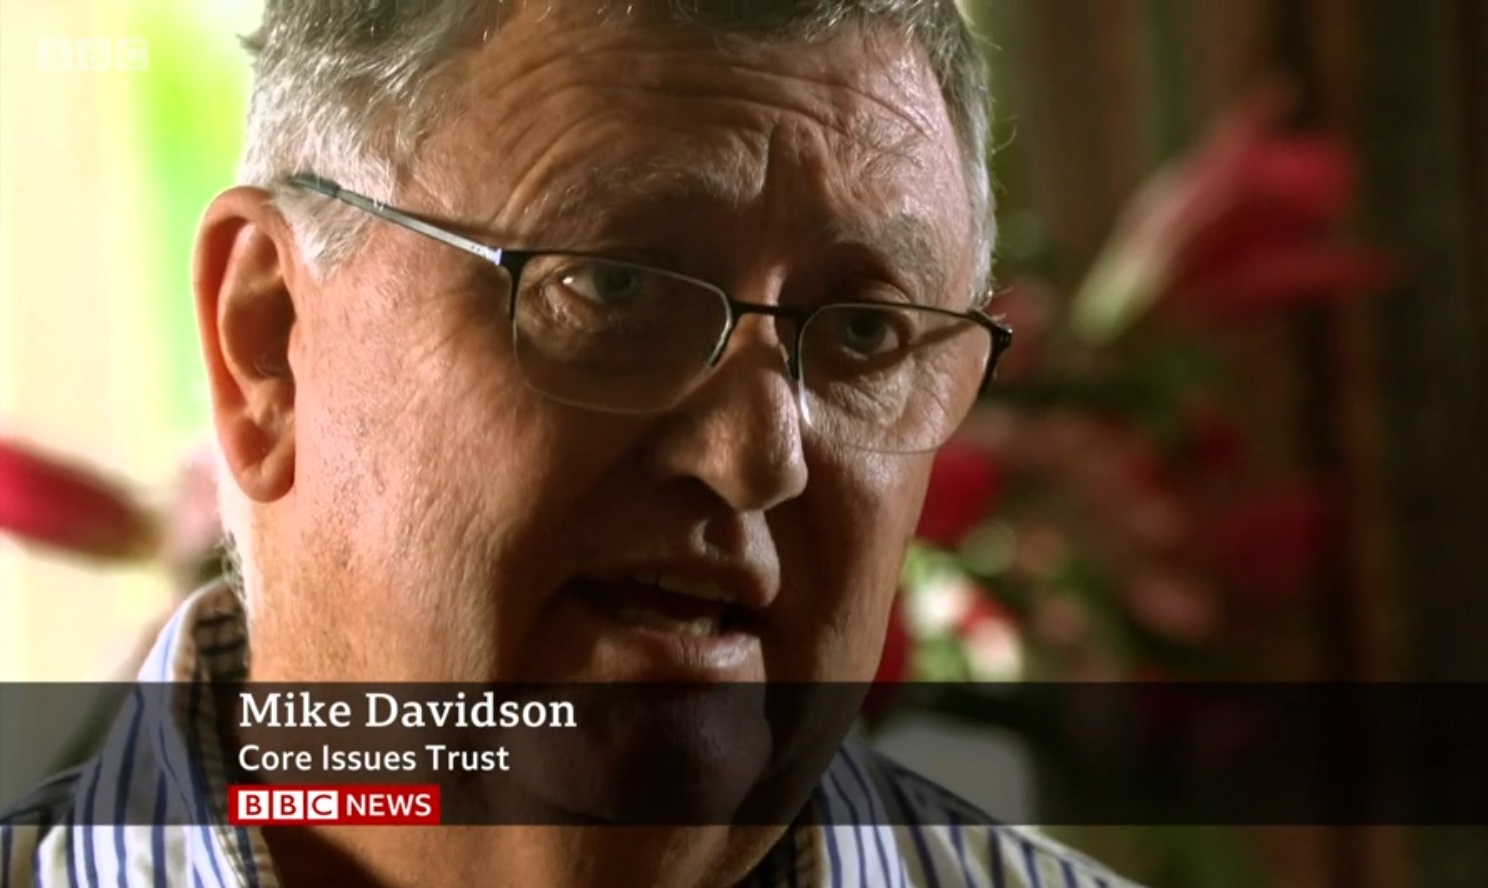 Conversion therapy advocate Mike Davidson of Core Issues Trust promoted the debunked idea that sexual orientation and gender identity can be cured.